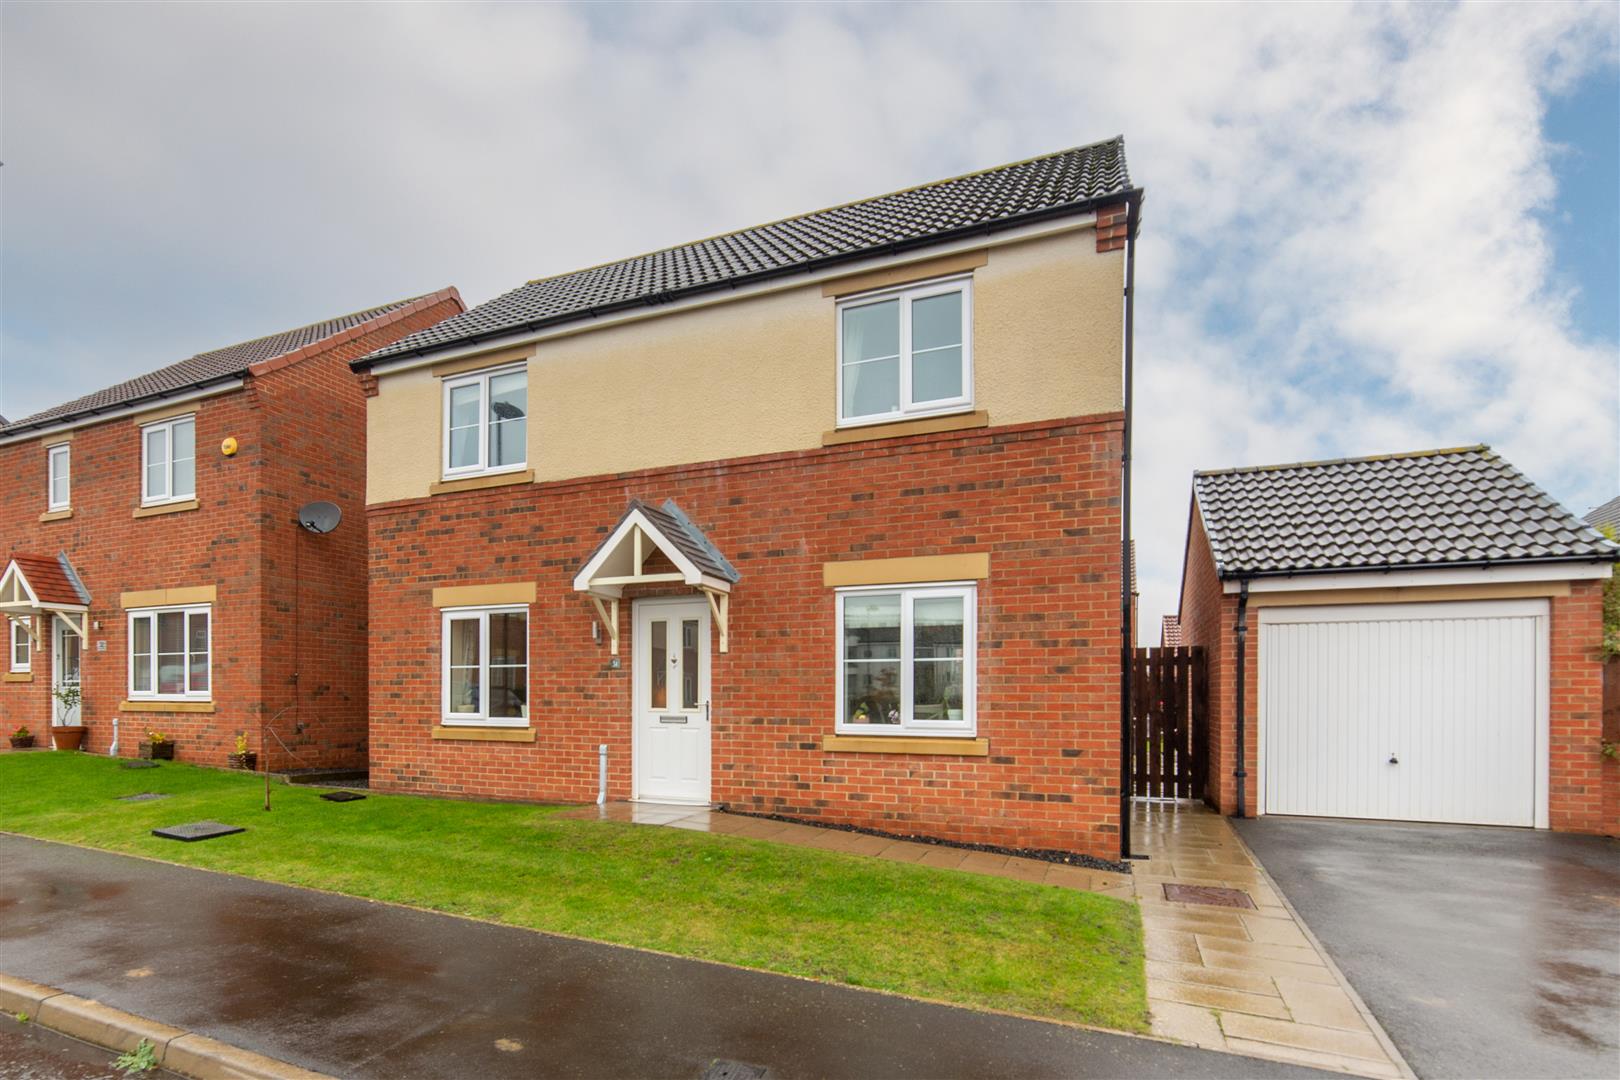 3 bed detached house for sale in Havannah Drive, Wideopen, NE13